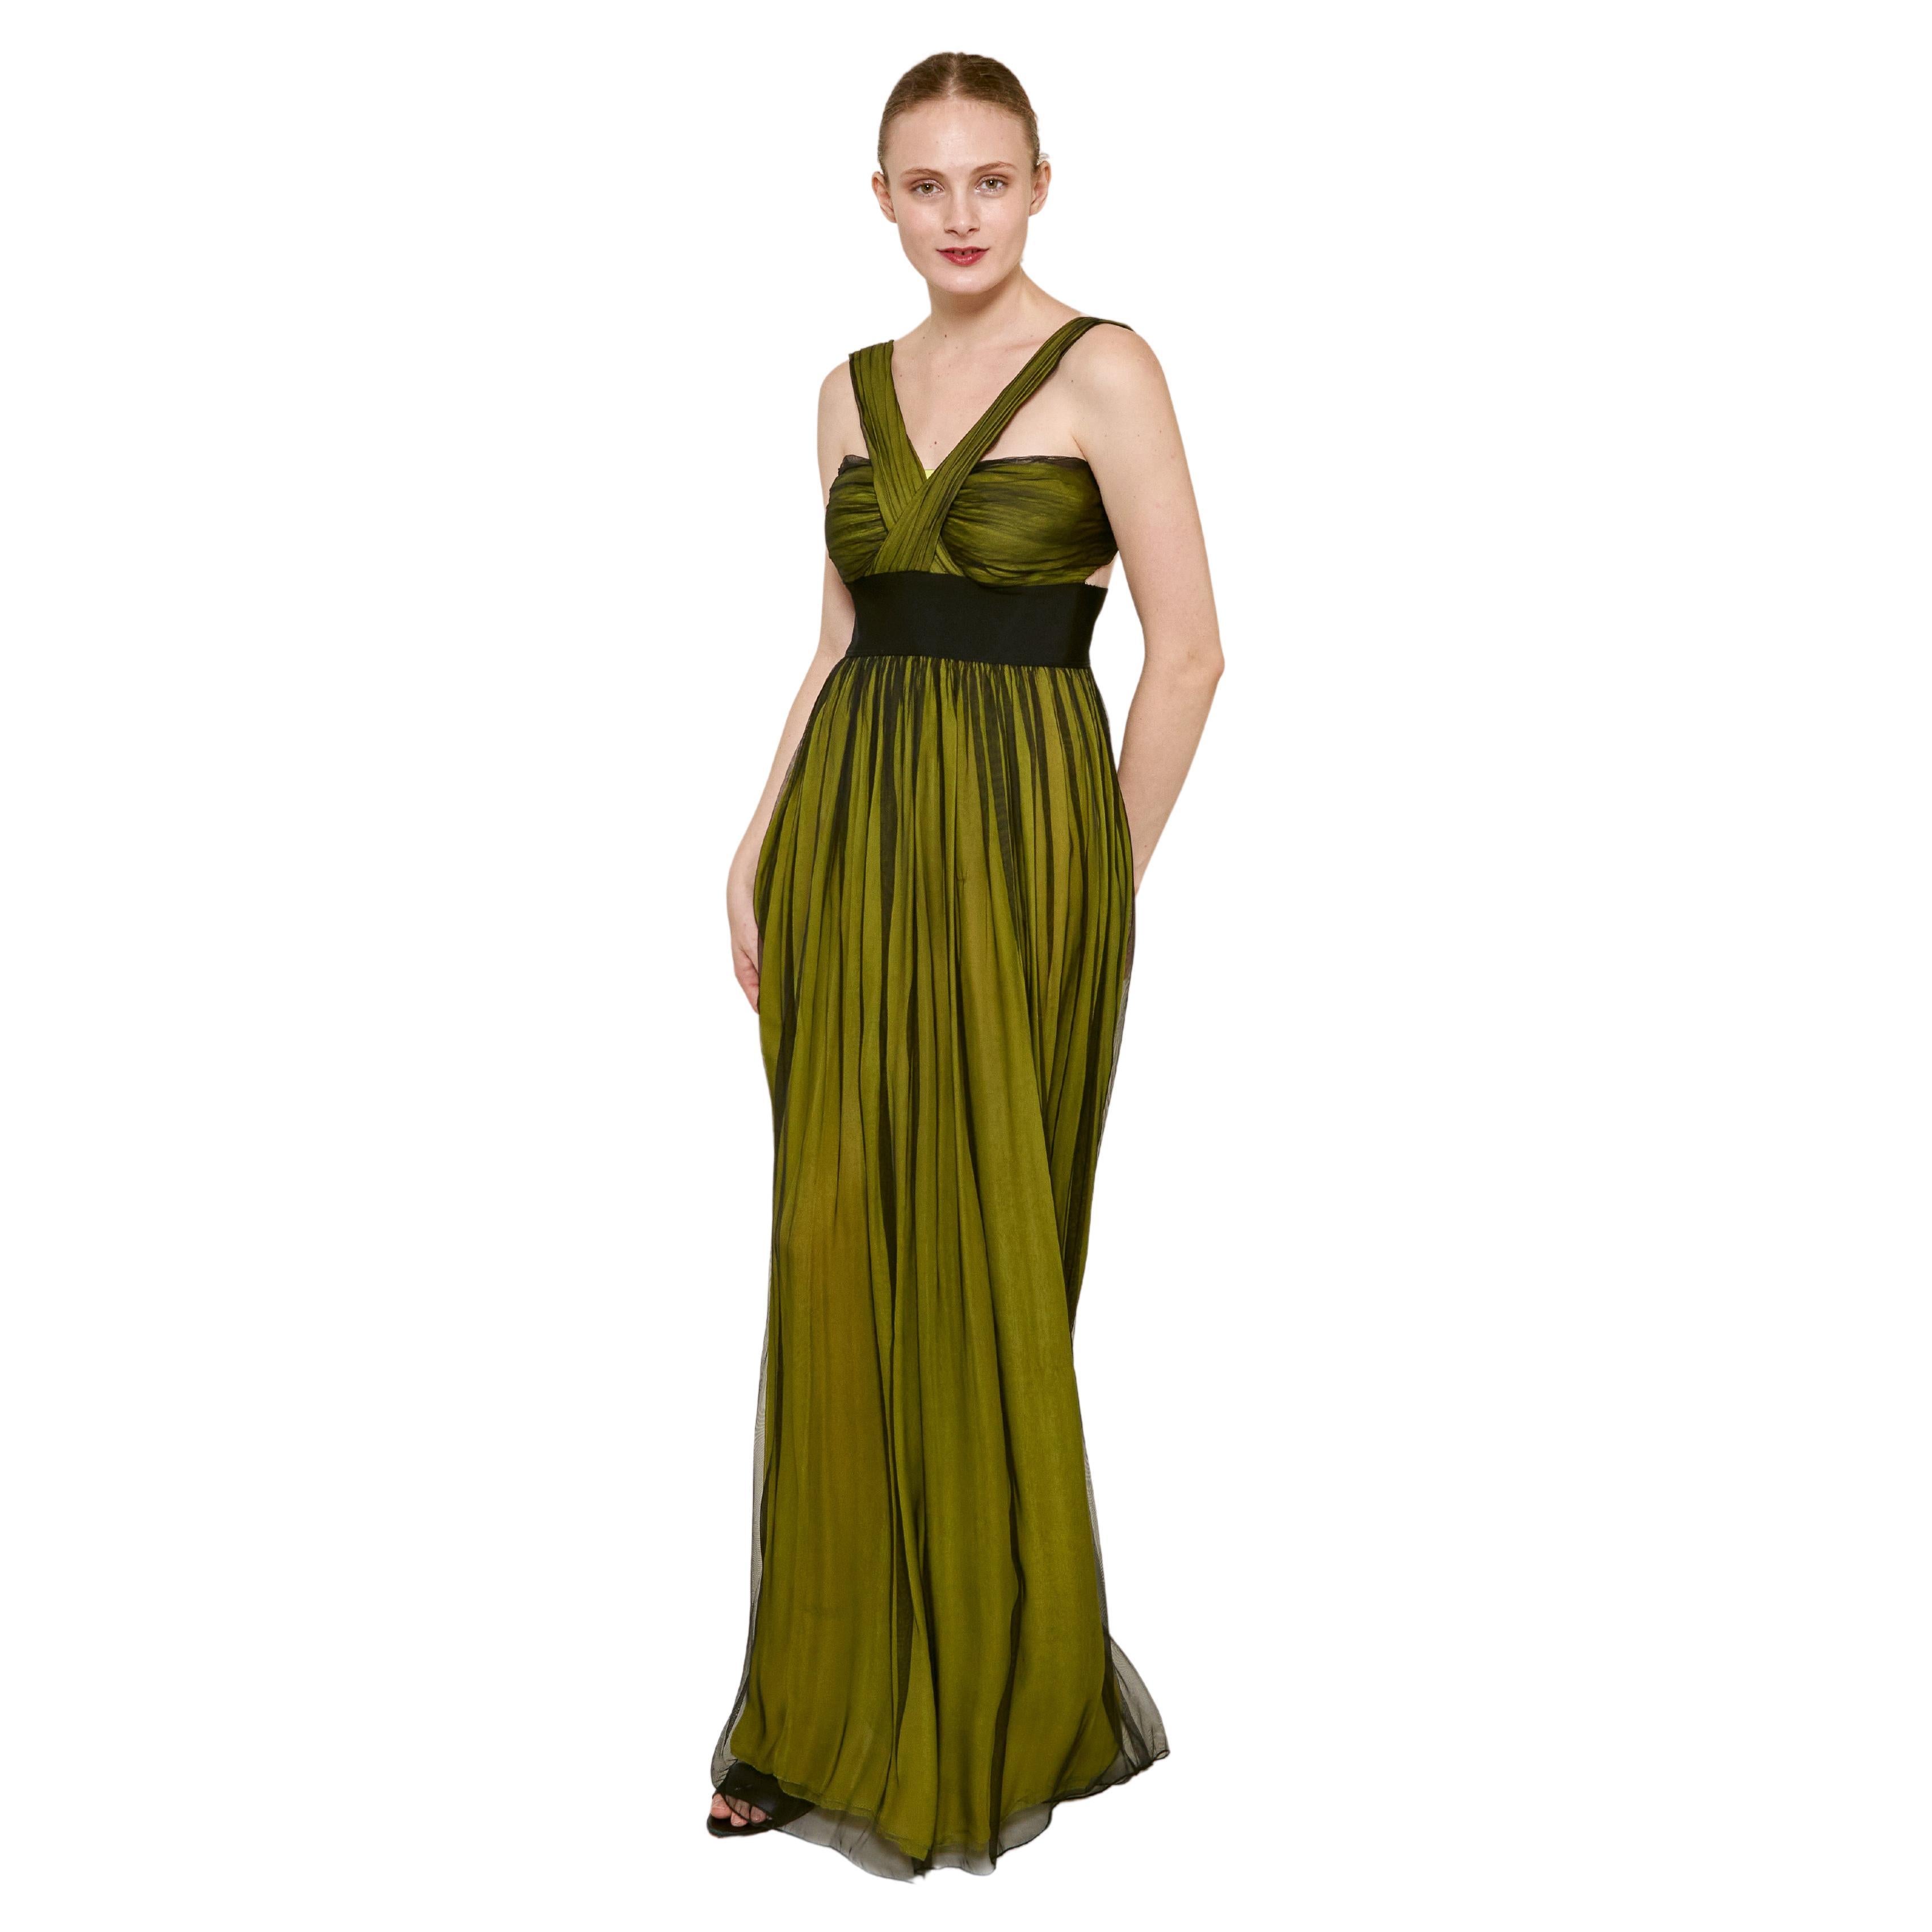 Dolce & Gabbana Green/Black Cross-Front Chiffon Gown For Sale